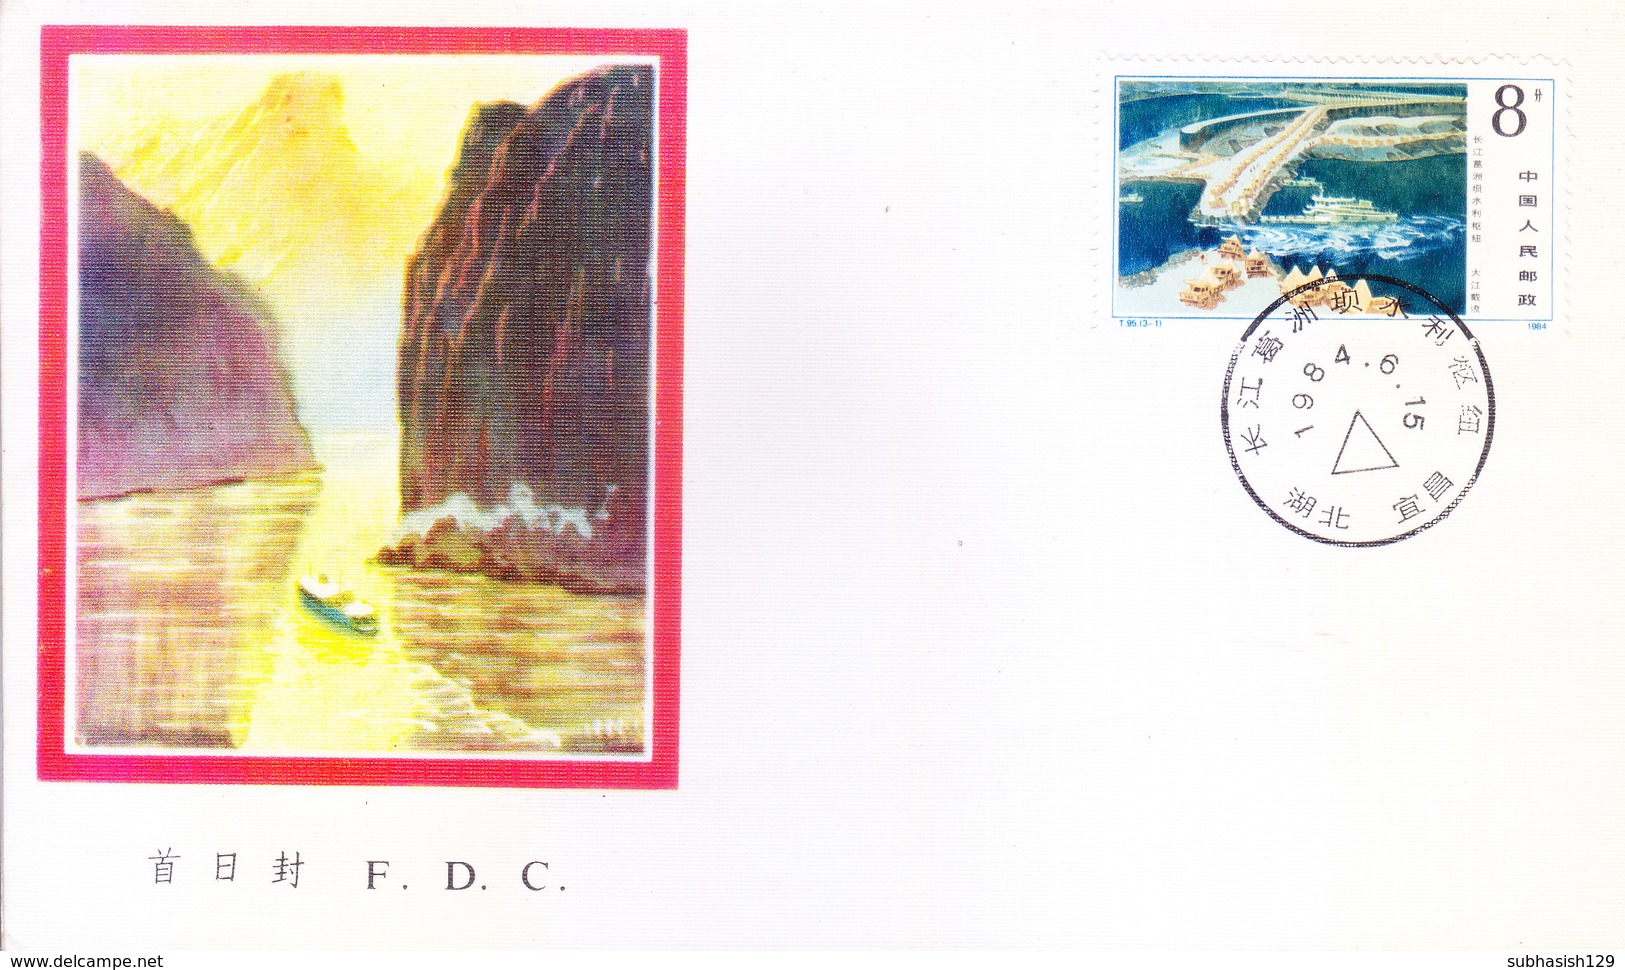 CHINA : ILLUSTRATED FIRST DAY COVER : DOCK AND BARRAGE ON STAMP, MOUNTAIN AND SEA ON CACHET - Covers & Documents